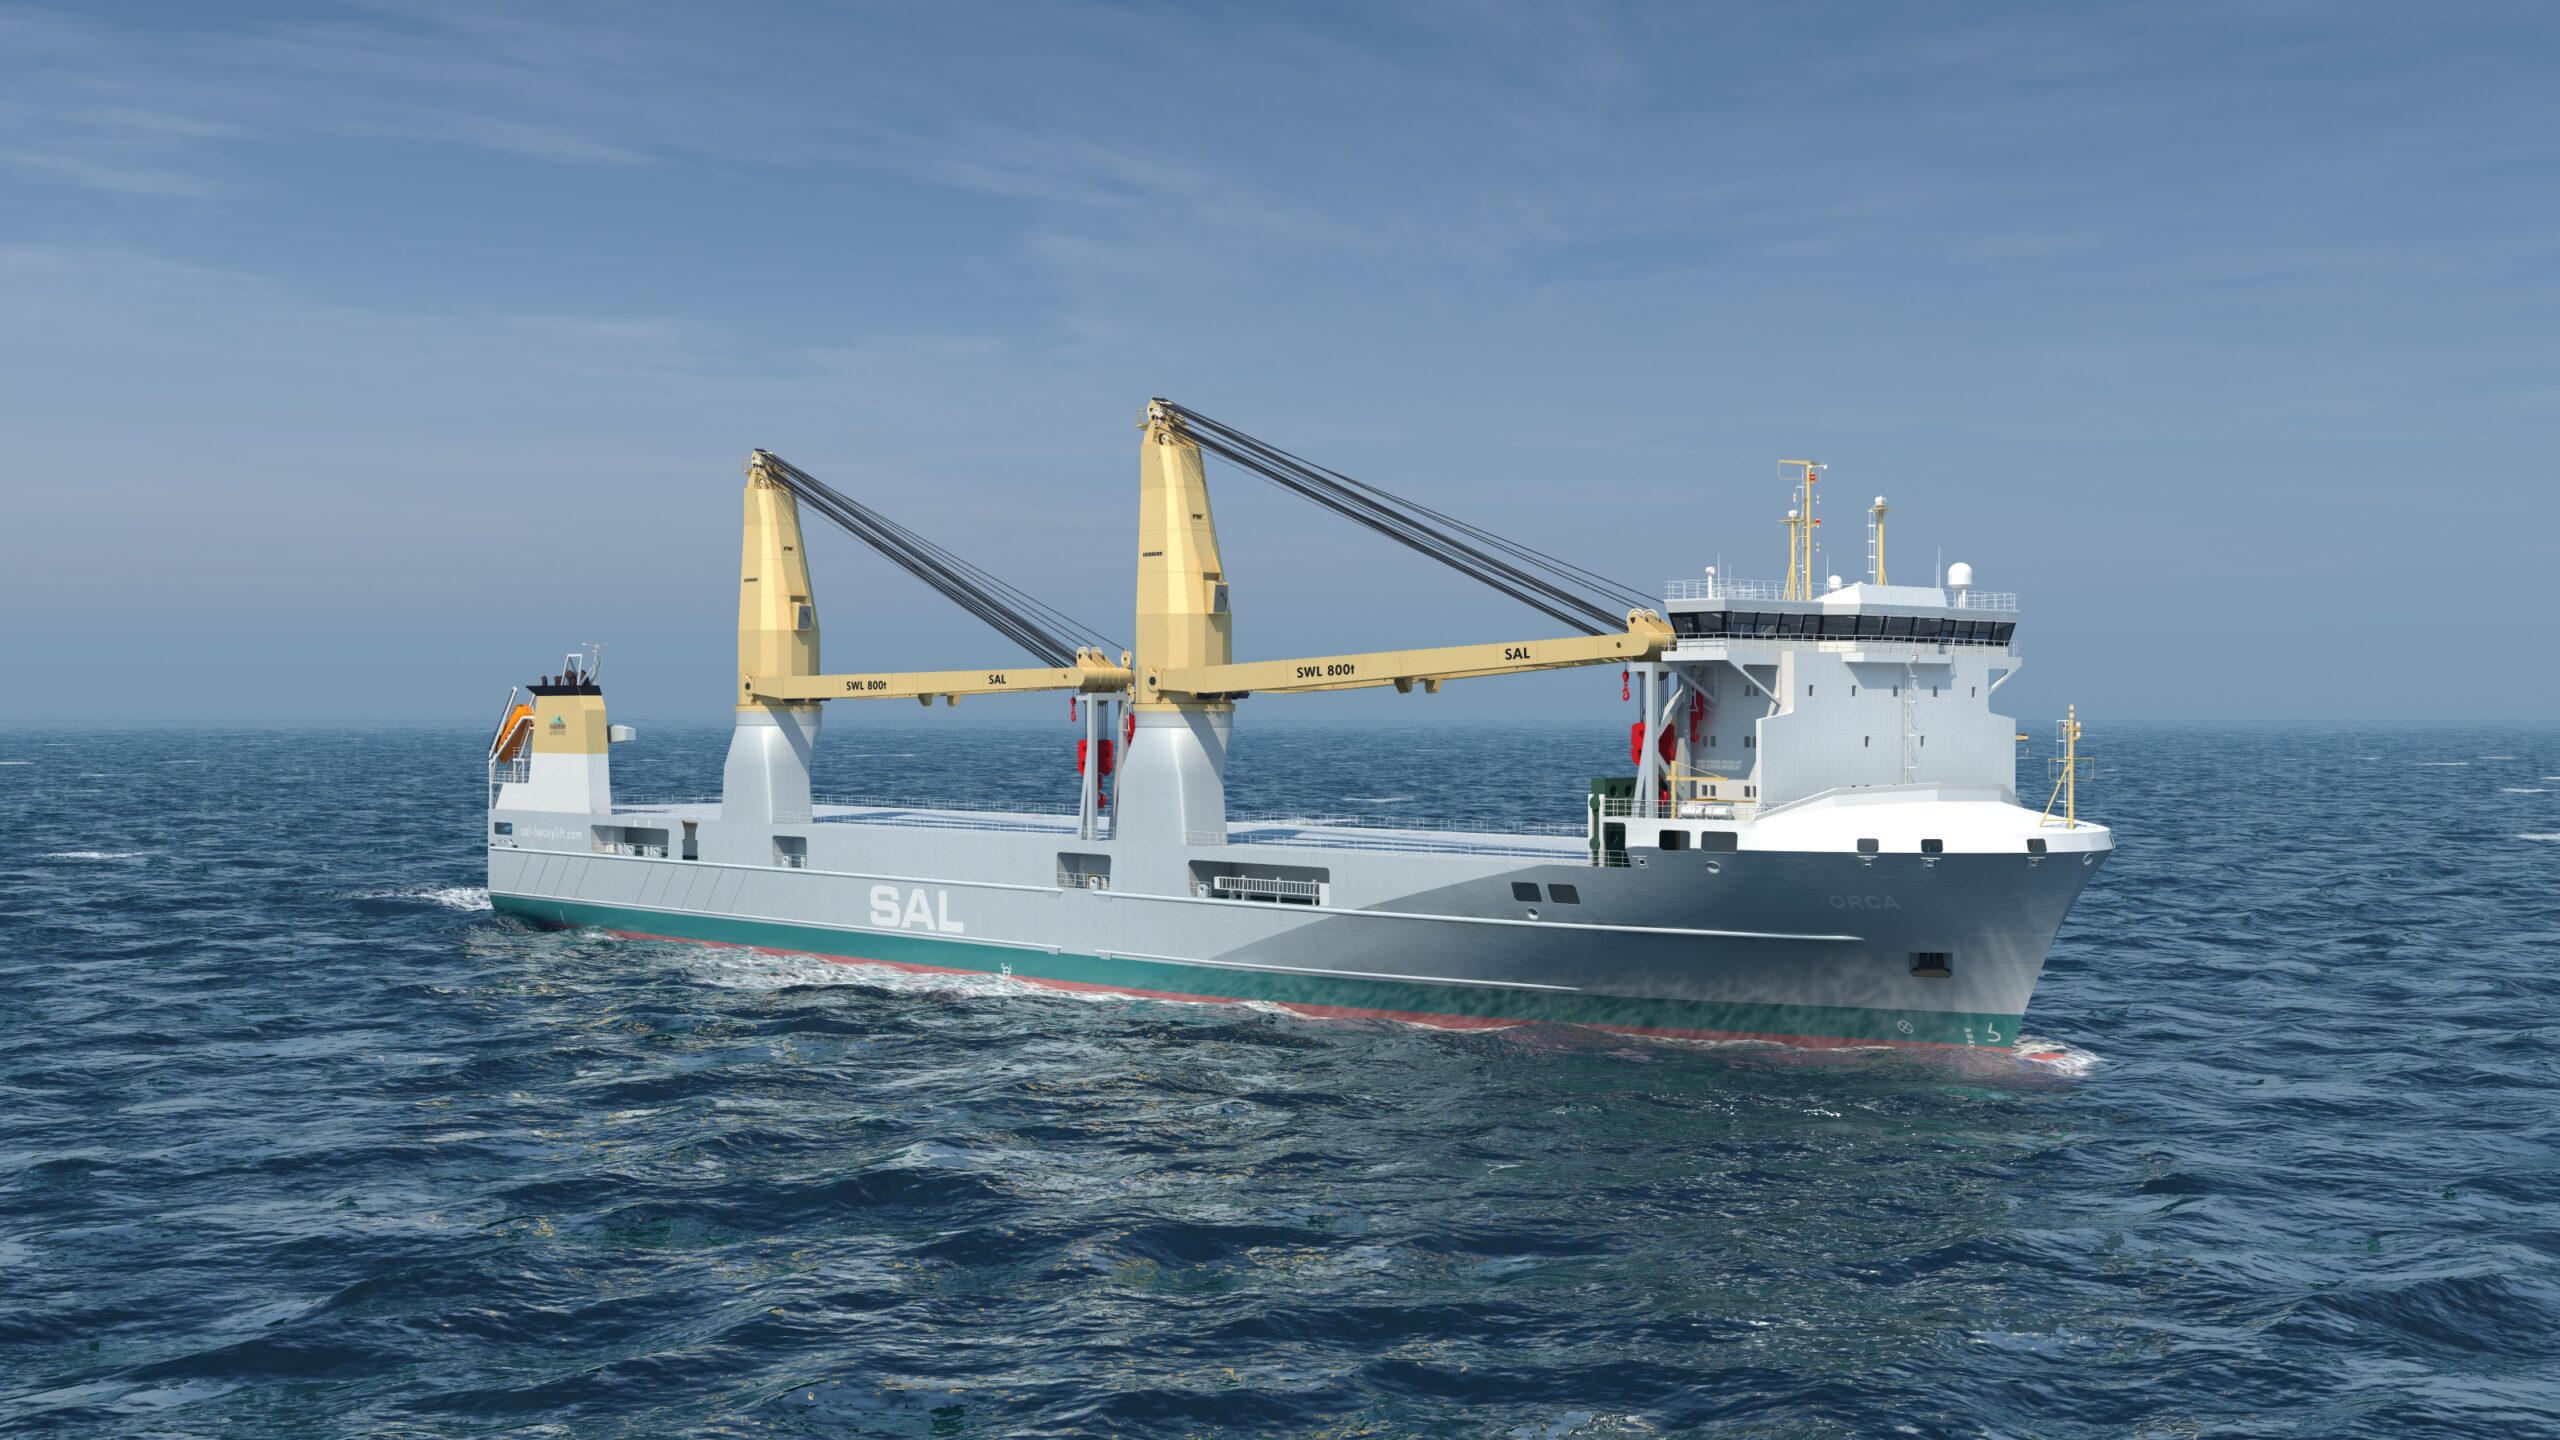 The series of four firm and two optional new-generation heavy-lift vessels, one of the world’s most ambitious heavy-lift newbuilding projects called Orca Class, will be propelled by SCHOTTEL Controllable Propellers (SCP).